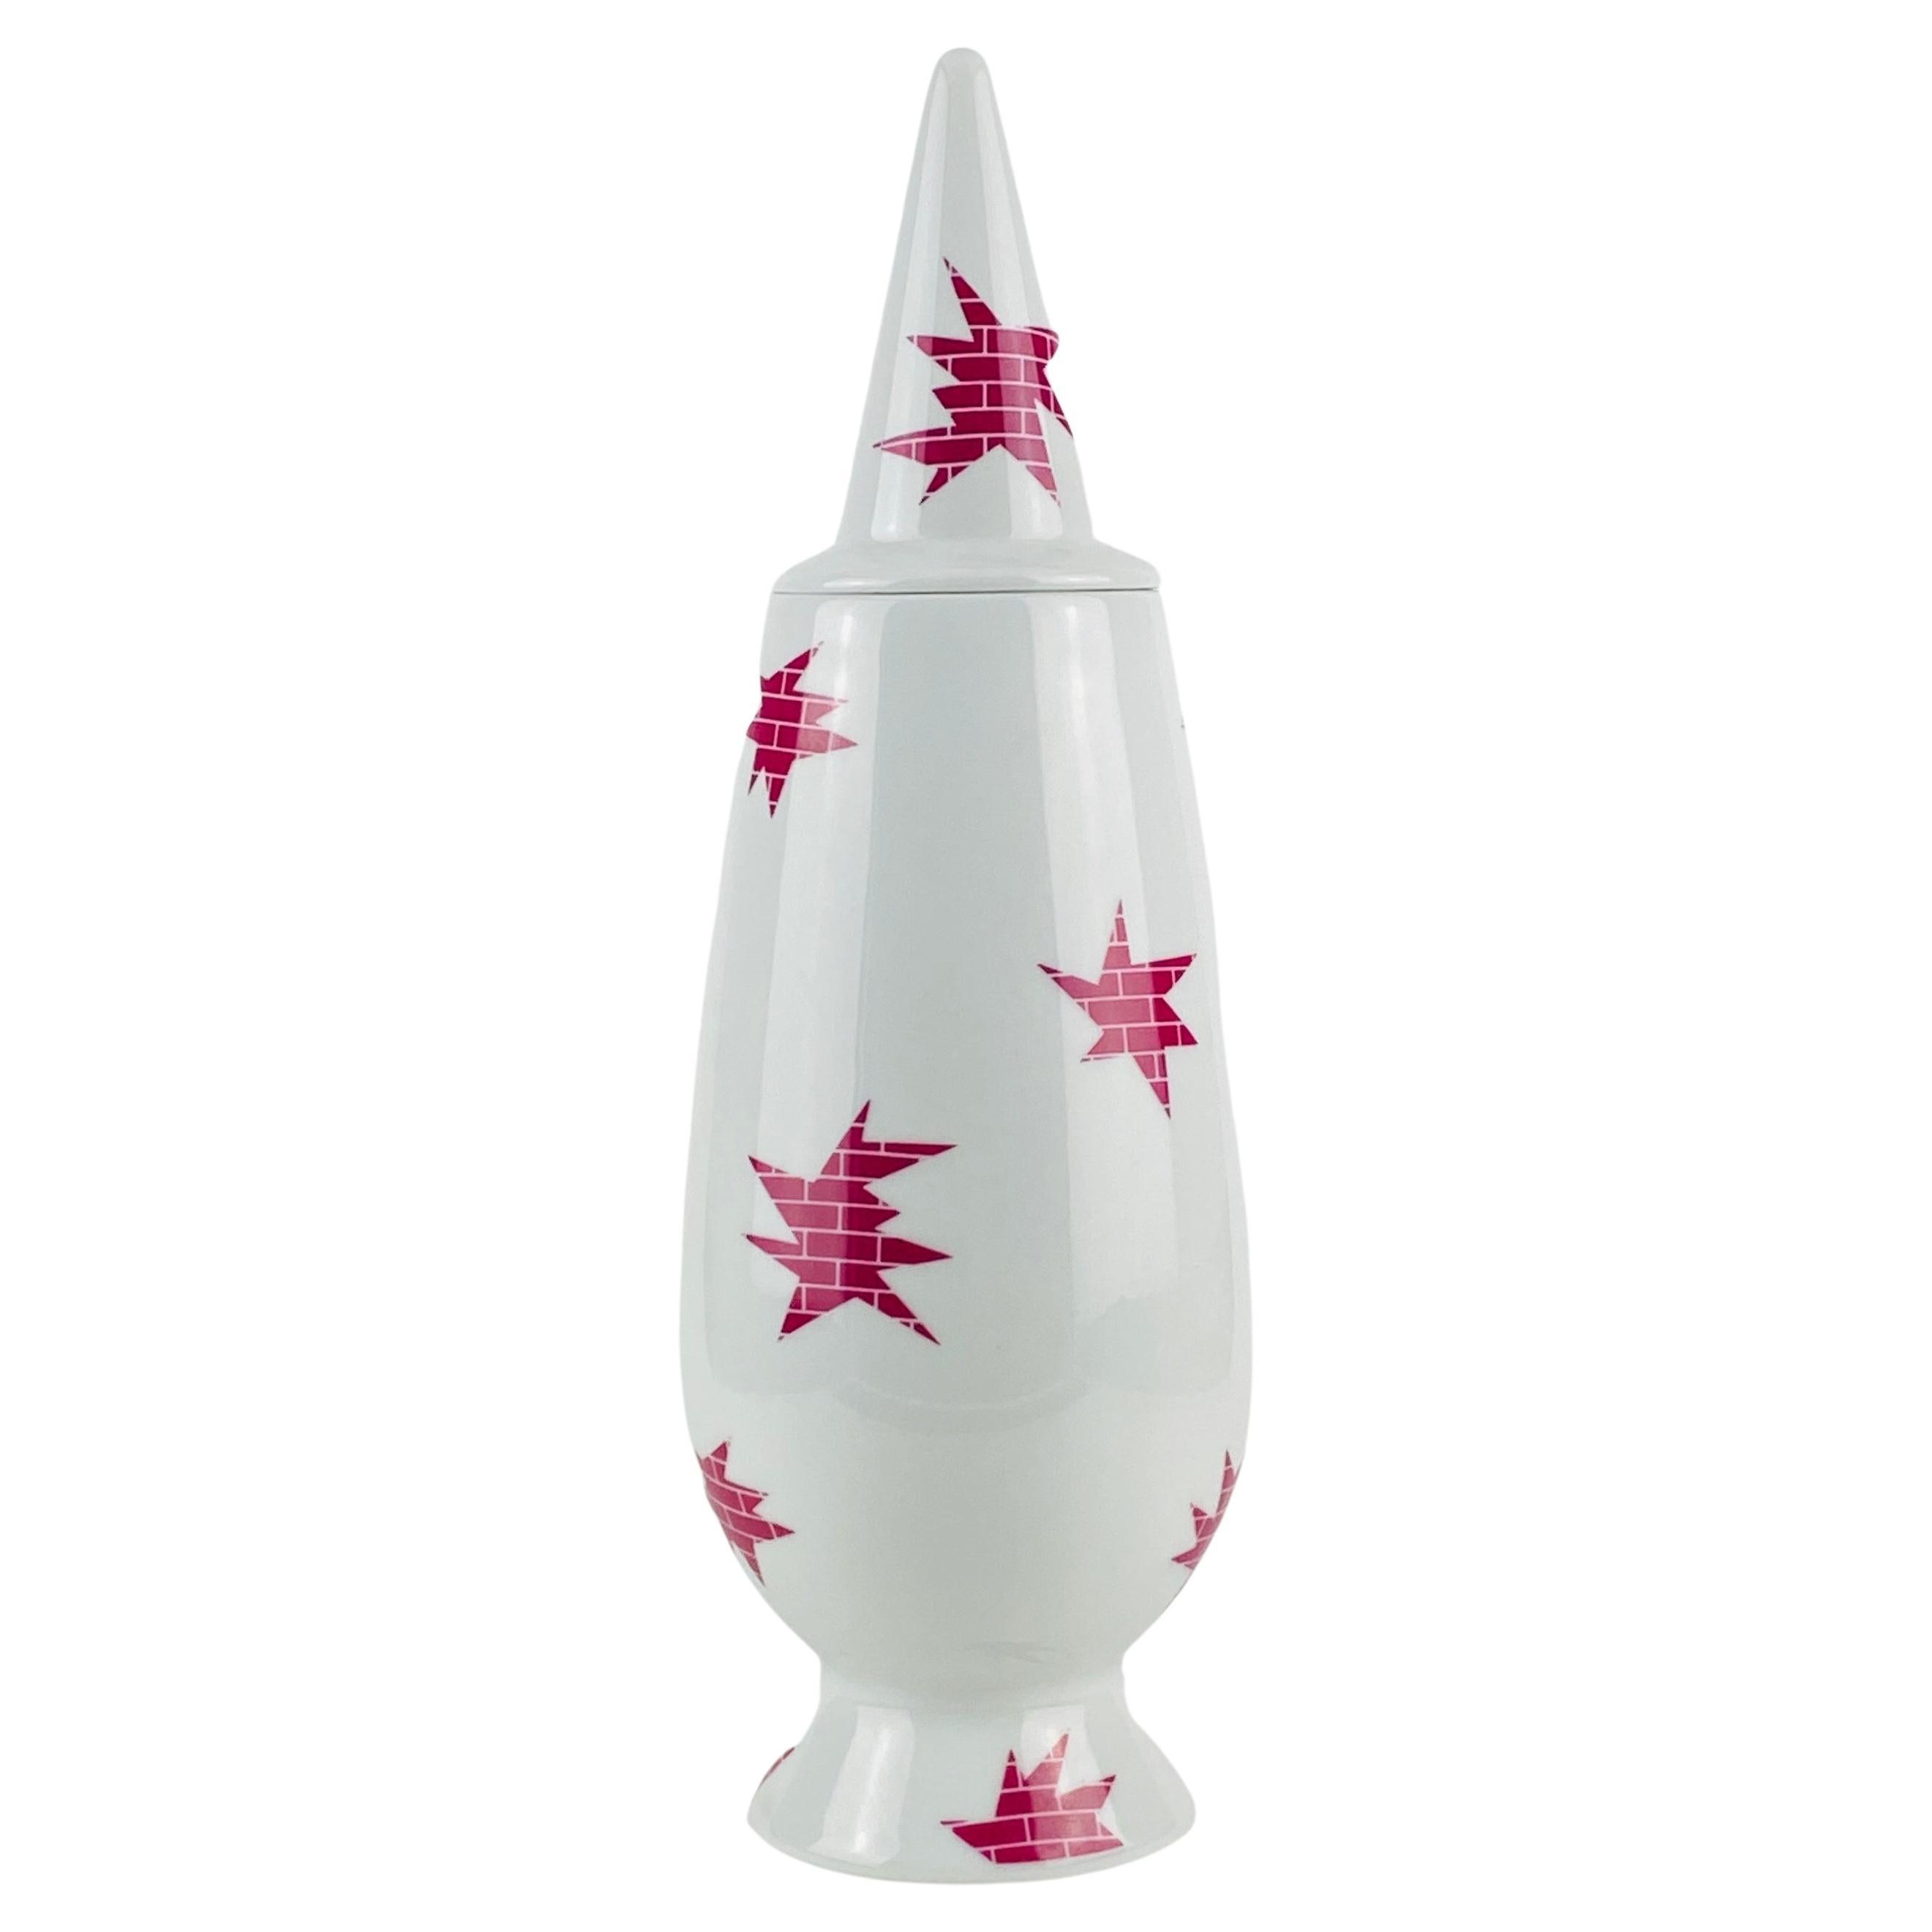 Alessi Tendentse Vase by Lapo Binazzi for A. Mendini 100% Make-Up Series N8